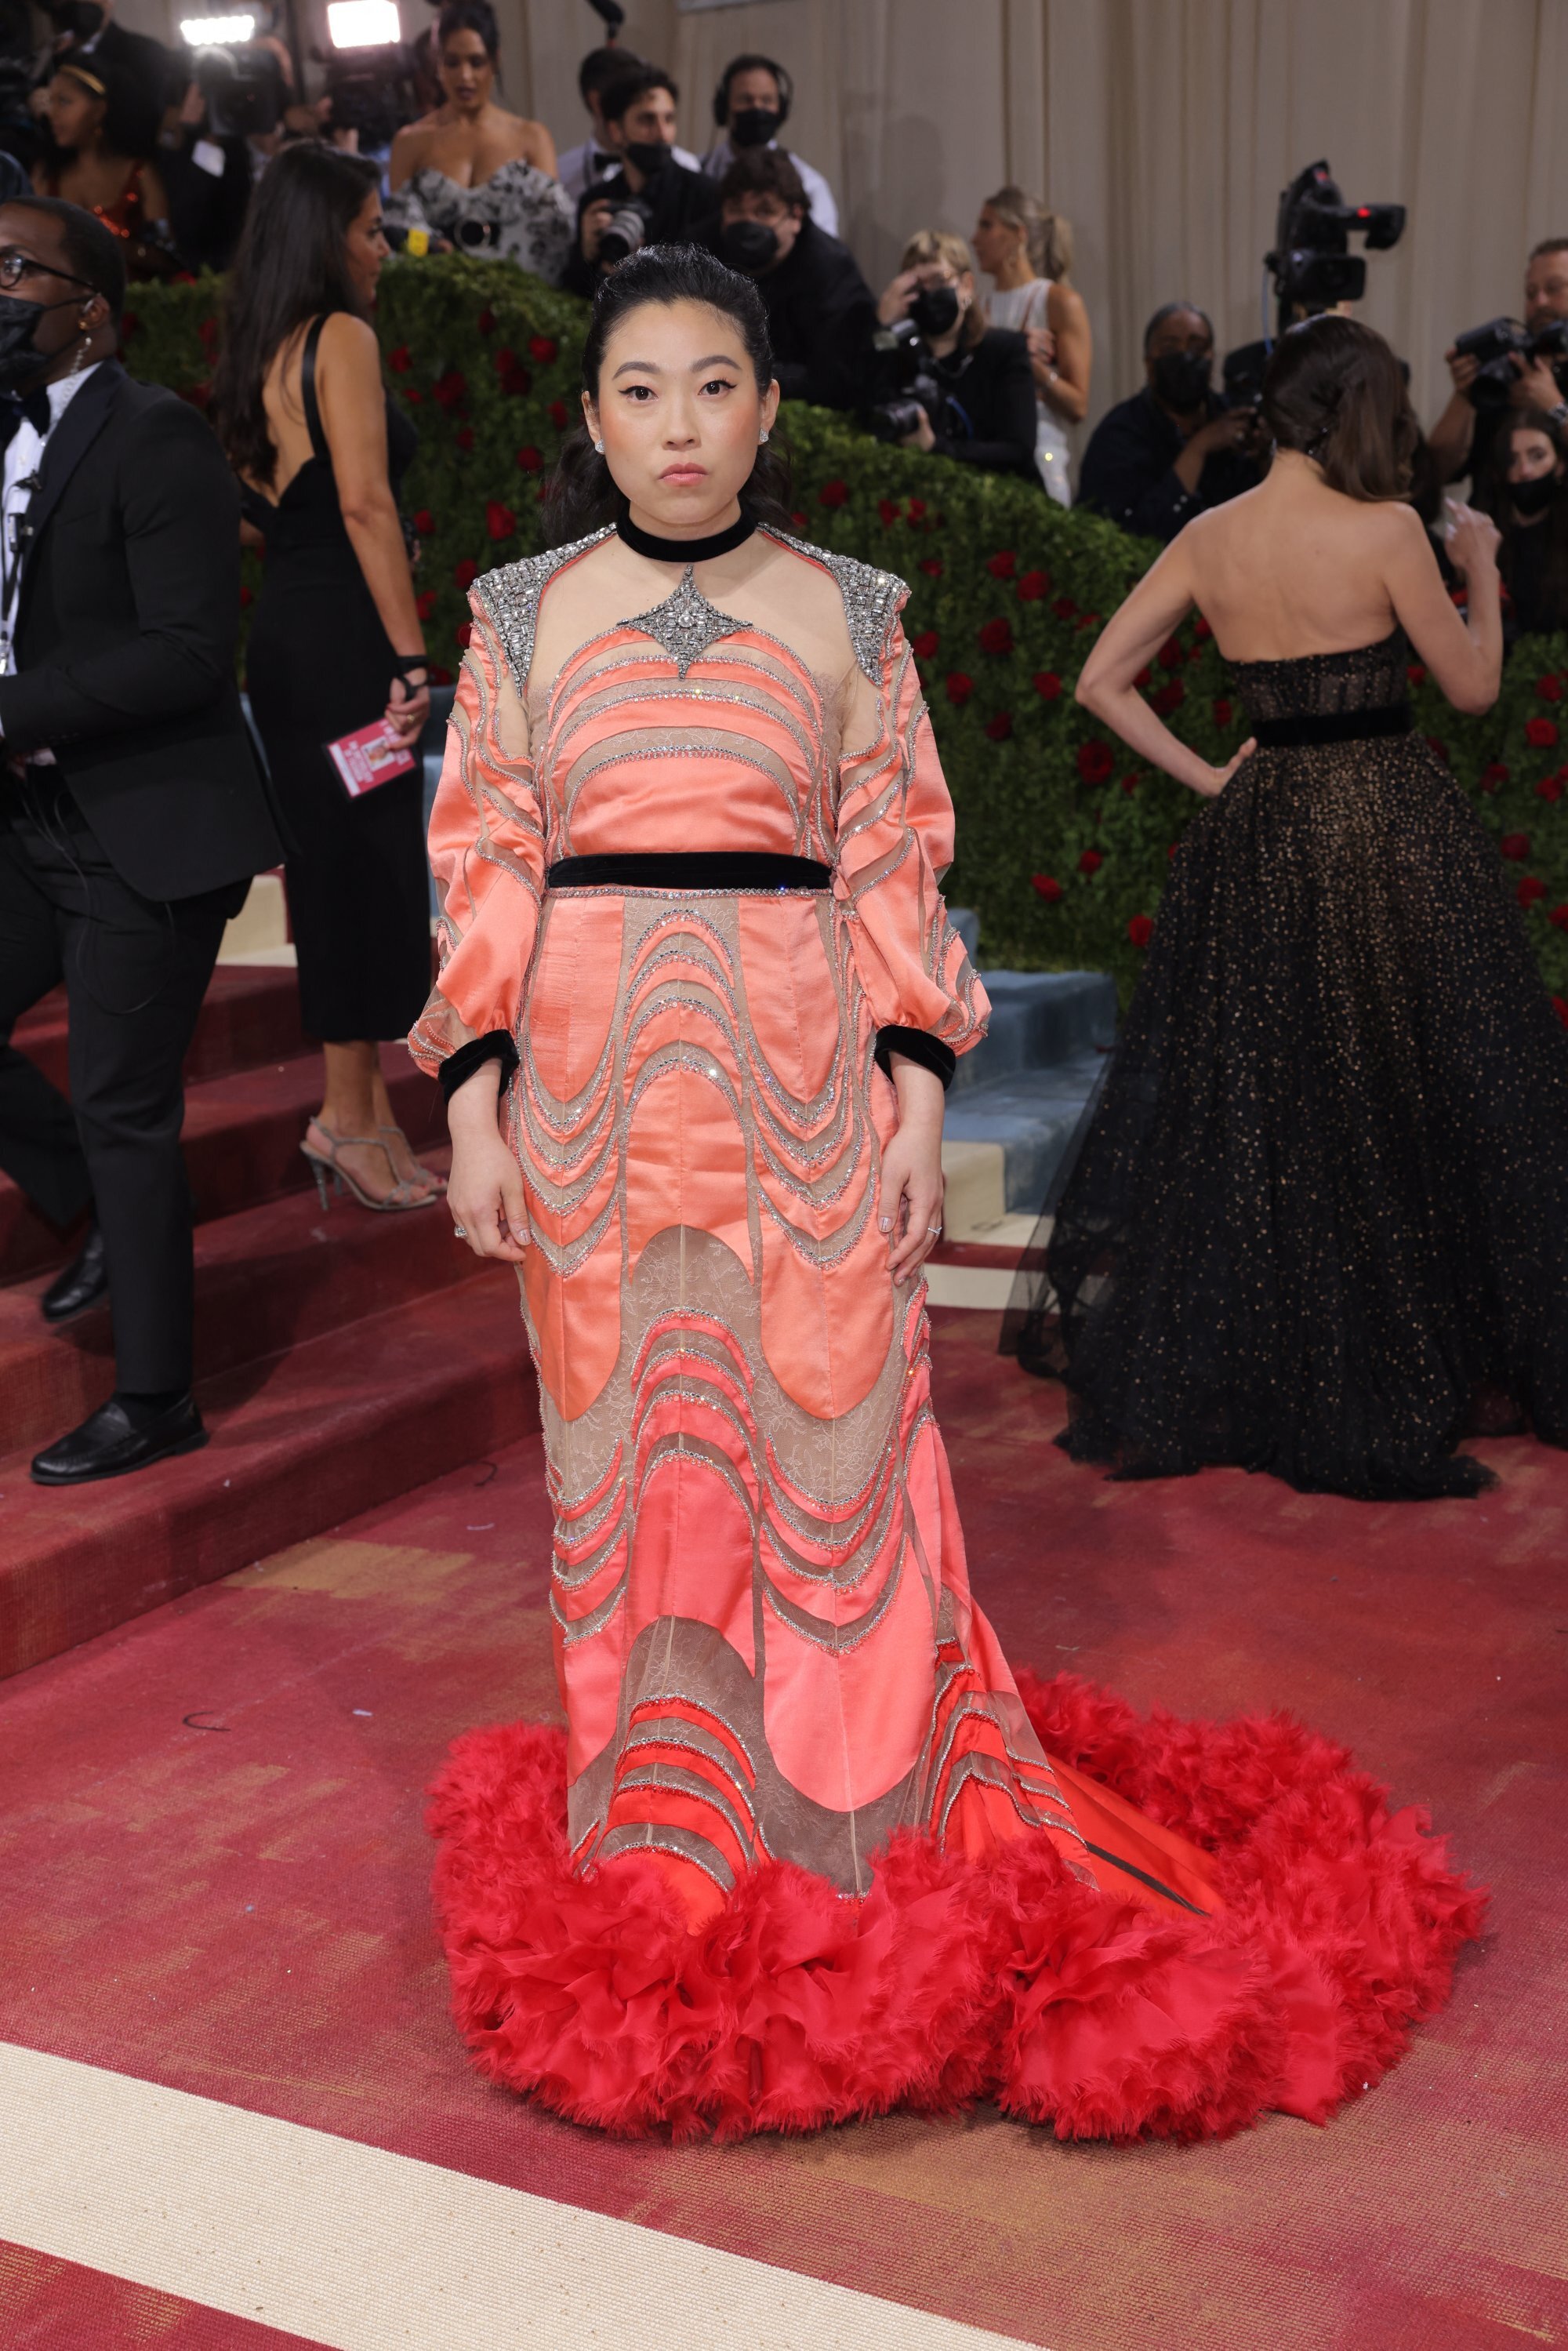 Awkwafina at the Met Gala in New York. Photo: Reuters